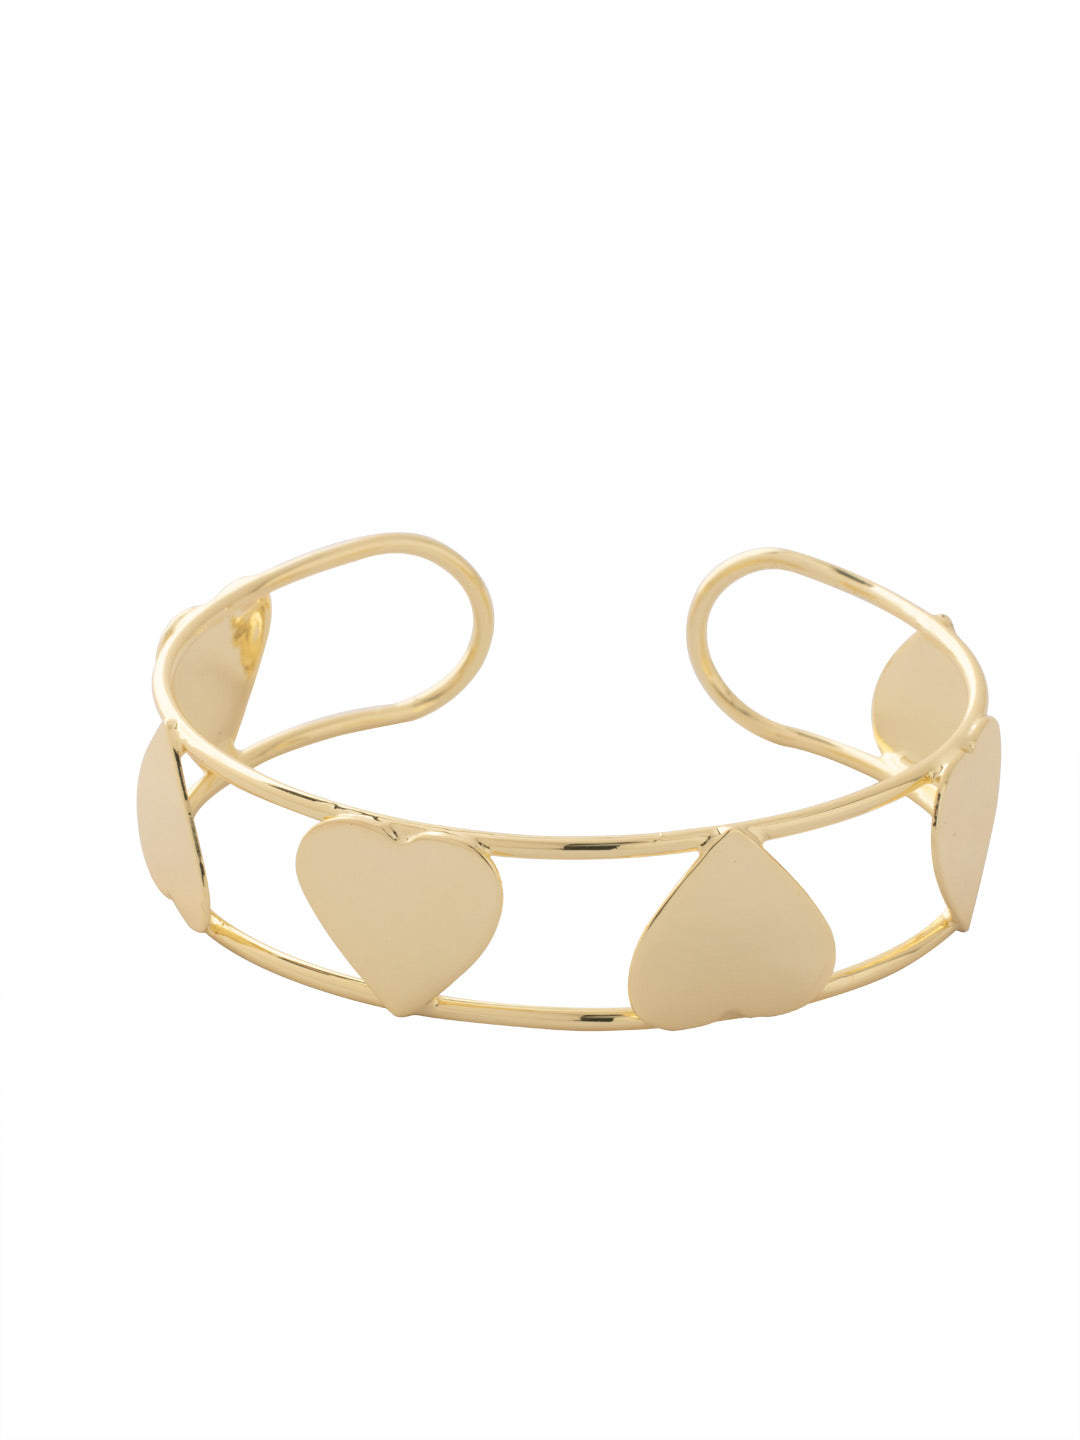 Open Heart Cuff Bracelet - BFN18BGMTL - <p>The Open Heart Cuff Bracelet features a cut-out cuff with metal hearts lined on the inside, adjustable to fit various wrist sizes. From Sorrelli's Bare Metallic collection in our Bright Gold-tone finish.</p>